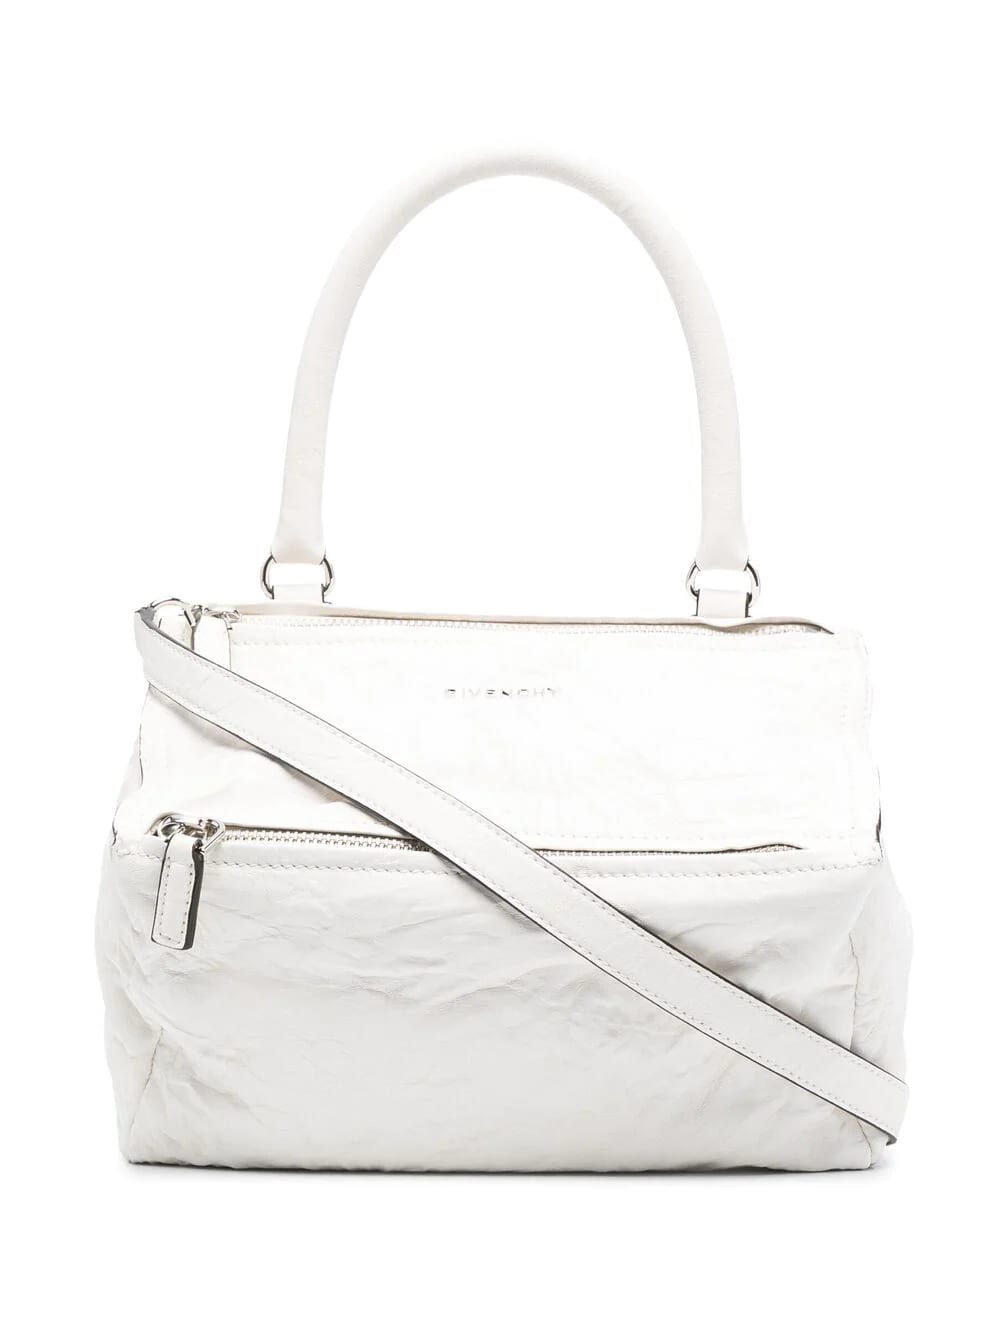 GIVENCHY WHITE SMALL PANDORA BAG IN AGED LEATHER,BB05251004 105